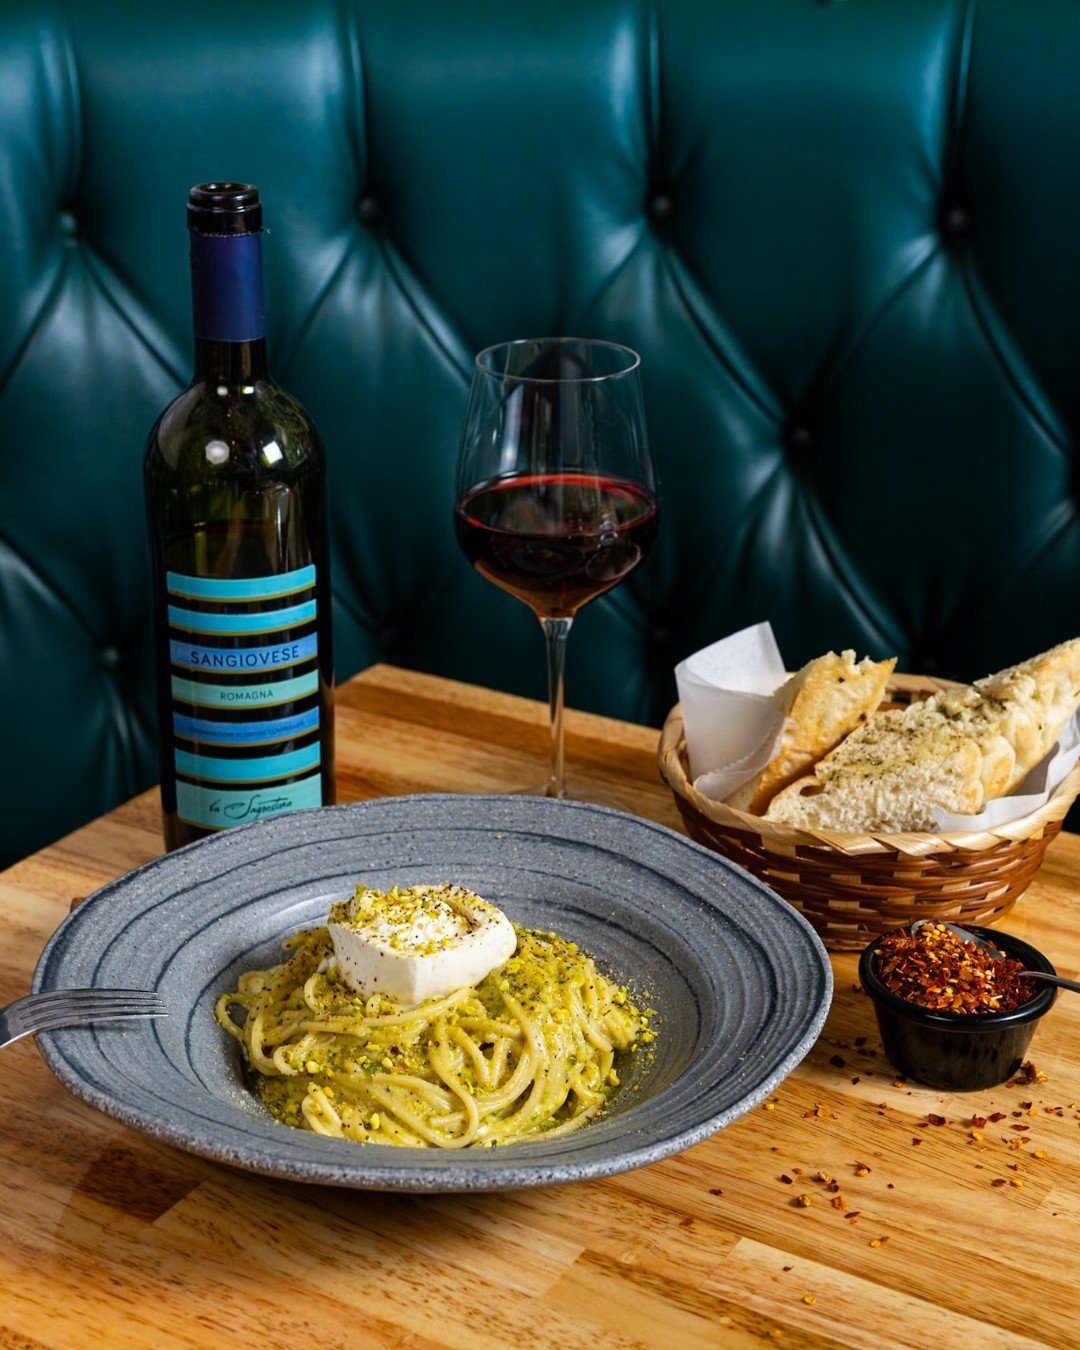 A cozy corner booth with pistachiosa, garlic bread, and a bottle of sangiovese? That is paradiso.